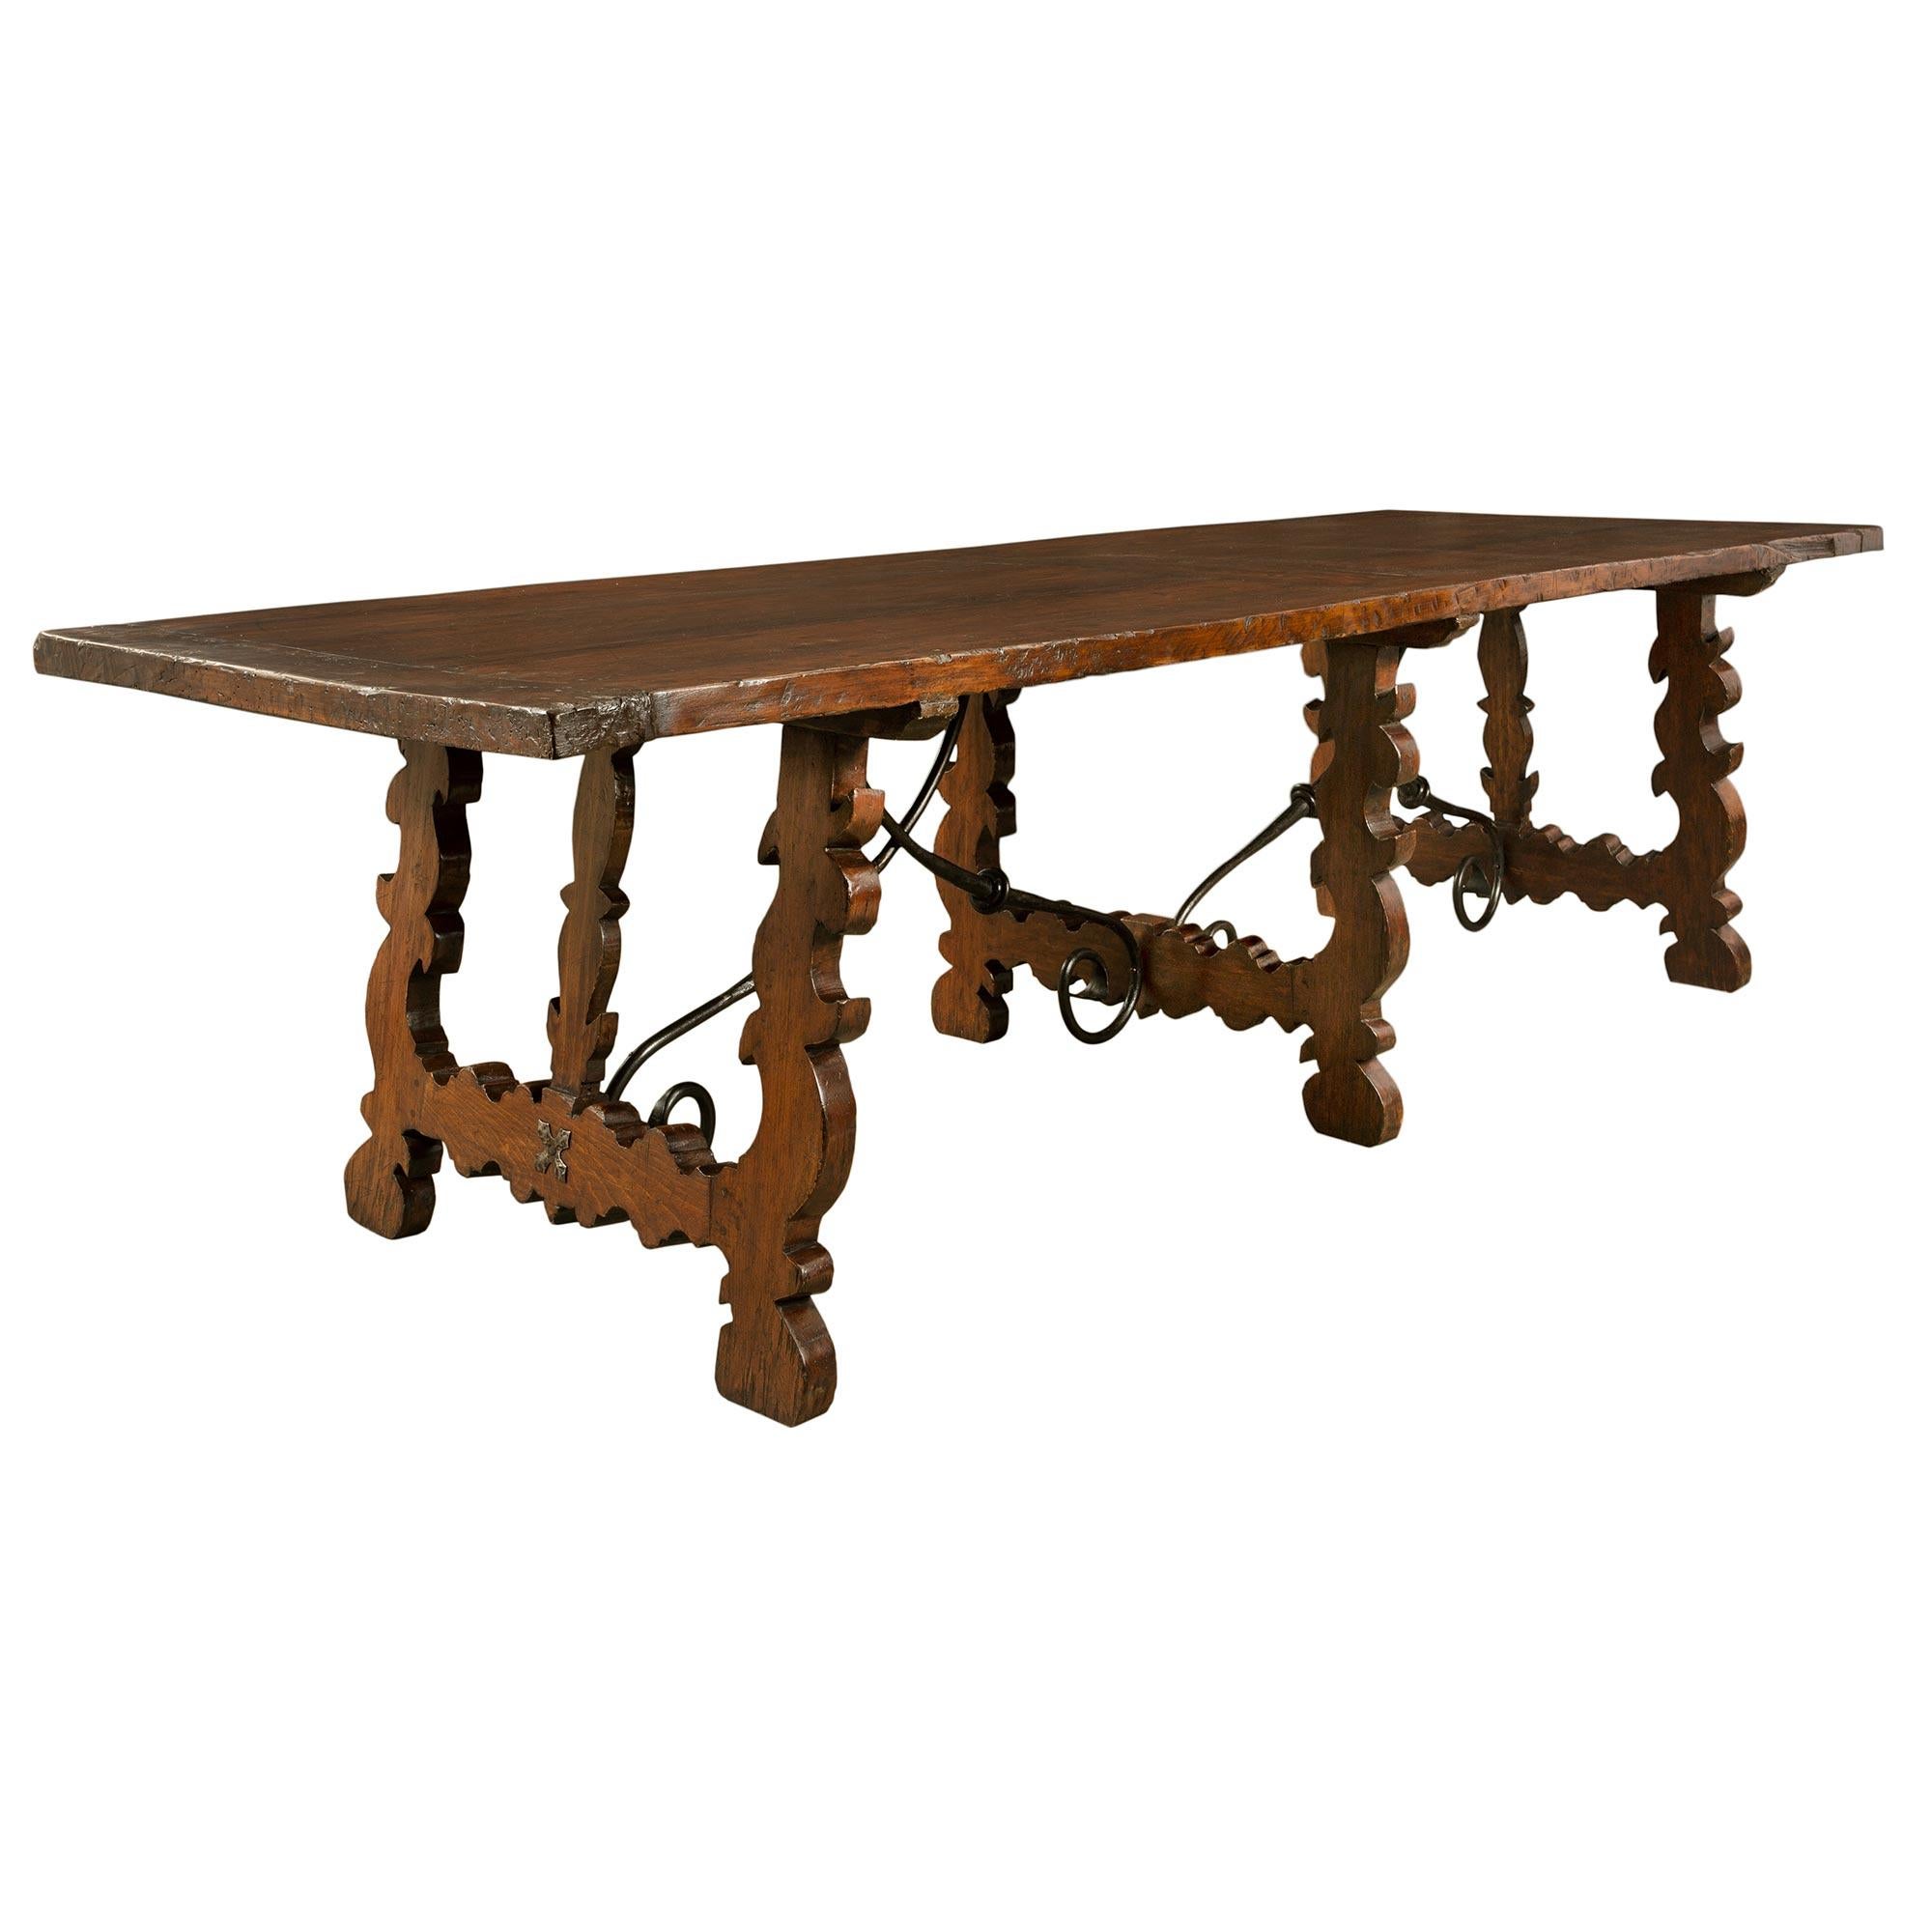 Italian 19th Century Walnut Trestle Table from Tuscany In Good Condition For Sale In West Palm Beach, FL